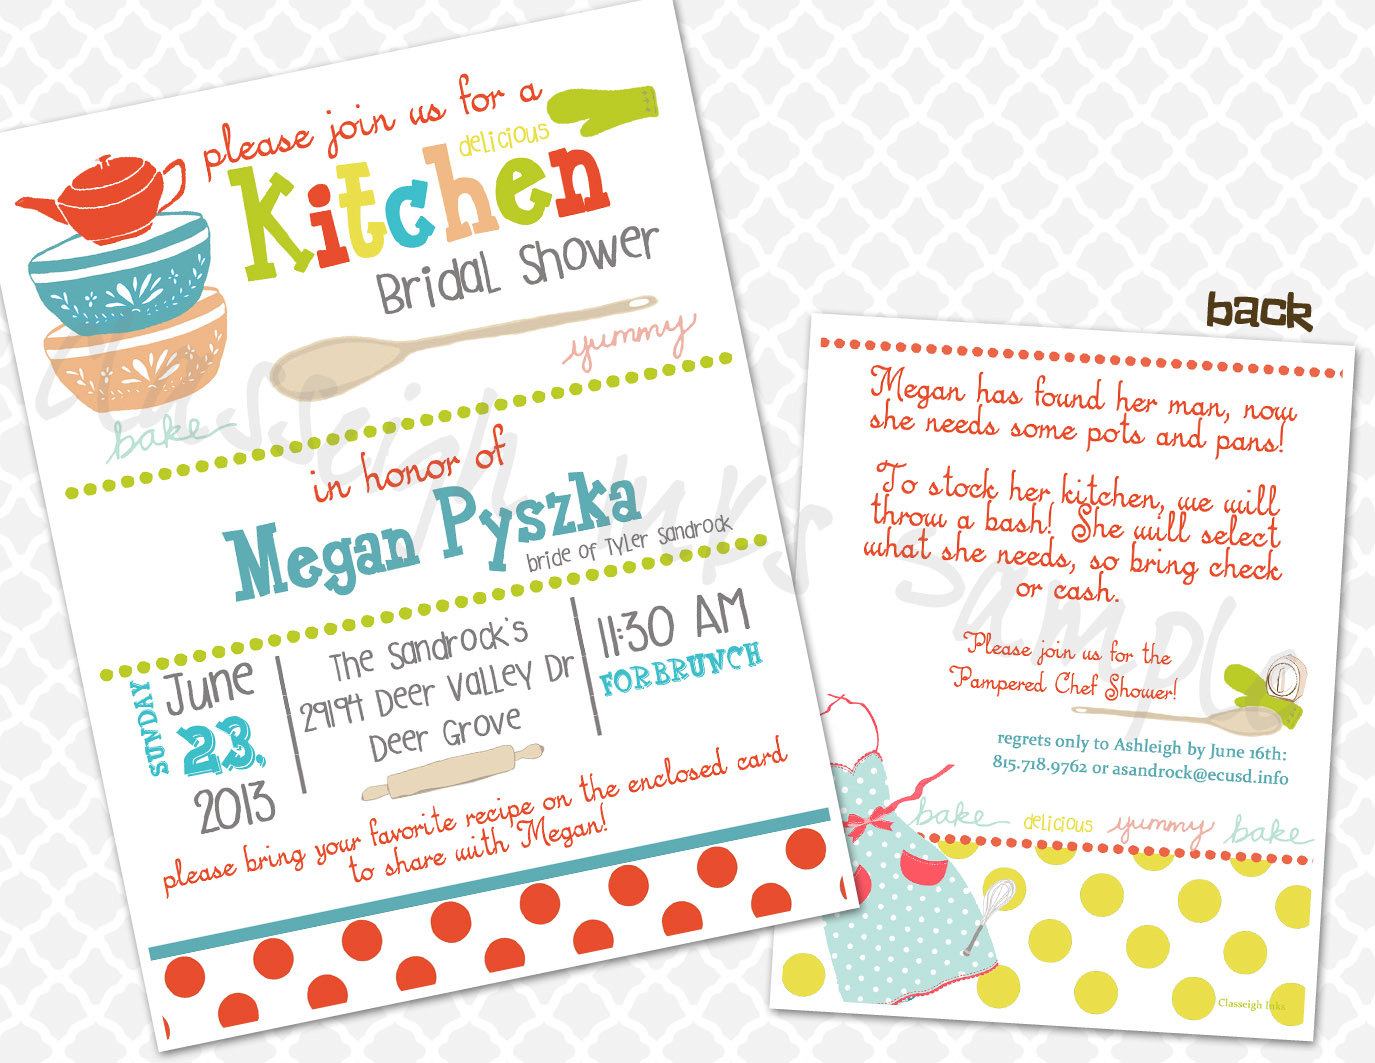 pampered-chef-invitation-template-business-template-ideas